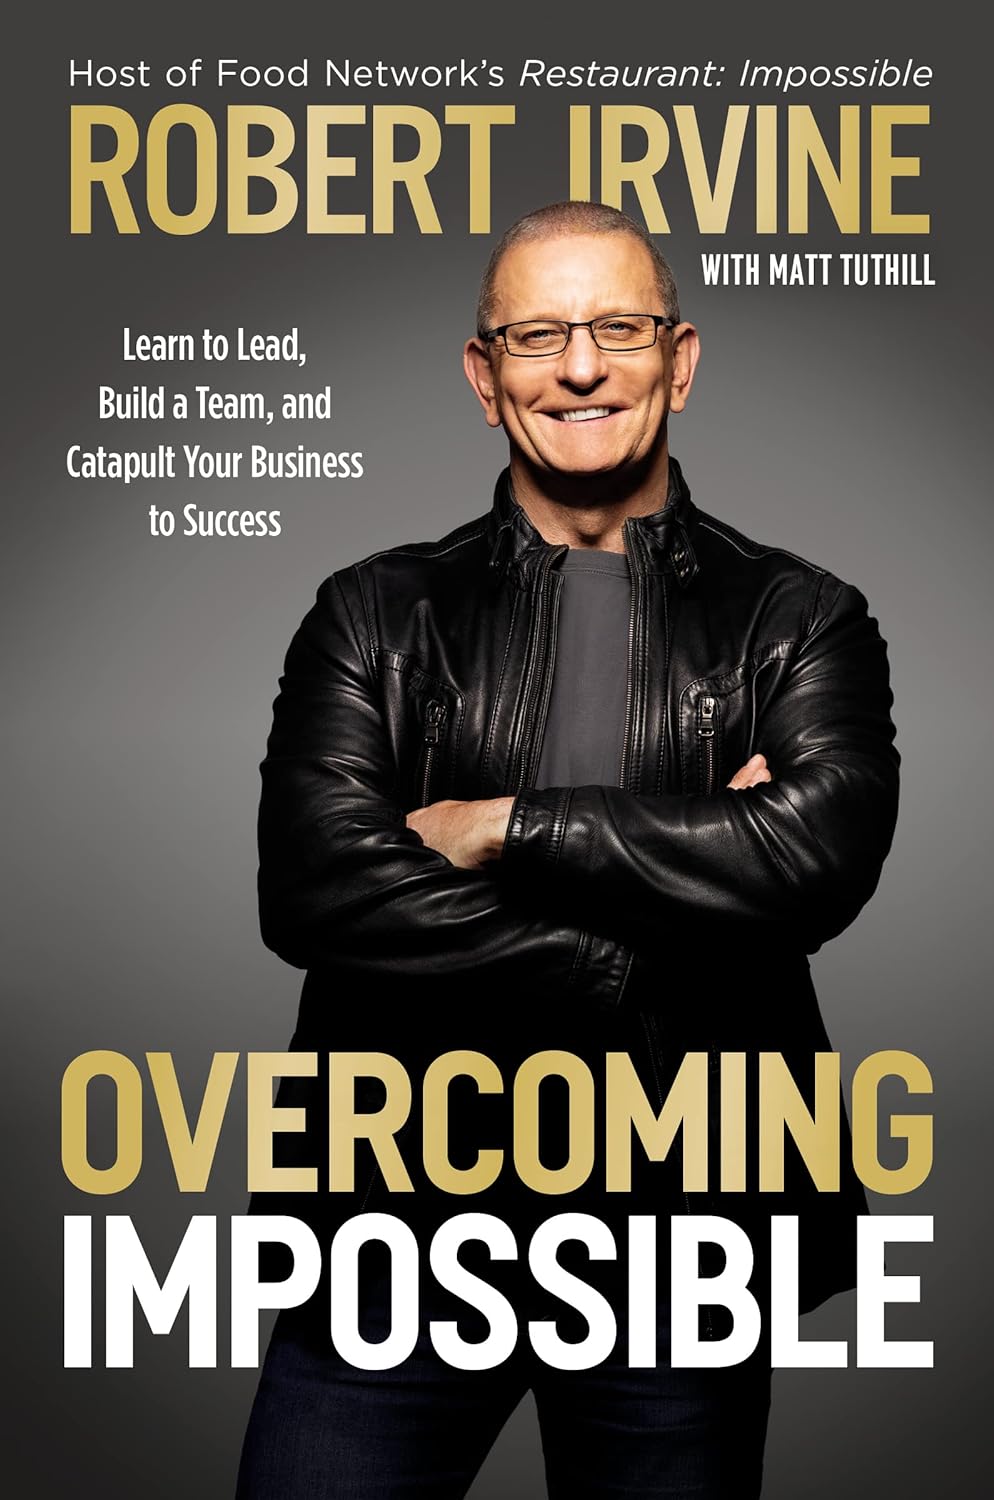 Robert Irvine Overcoming Impossible book cover